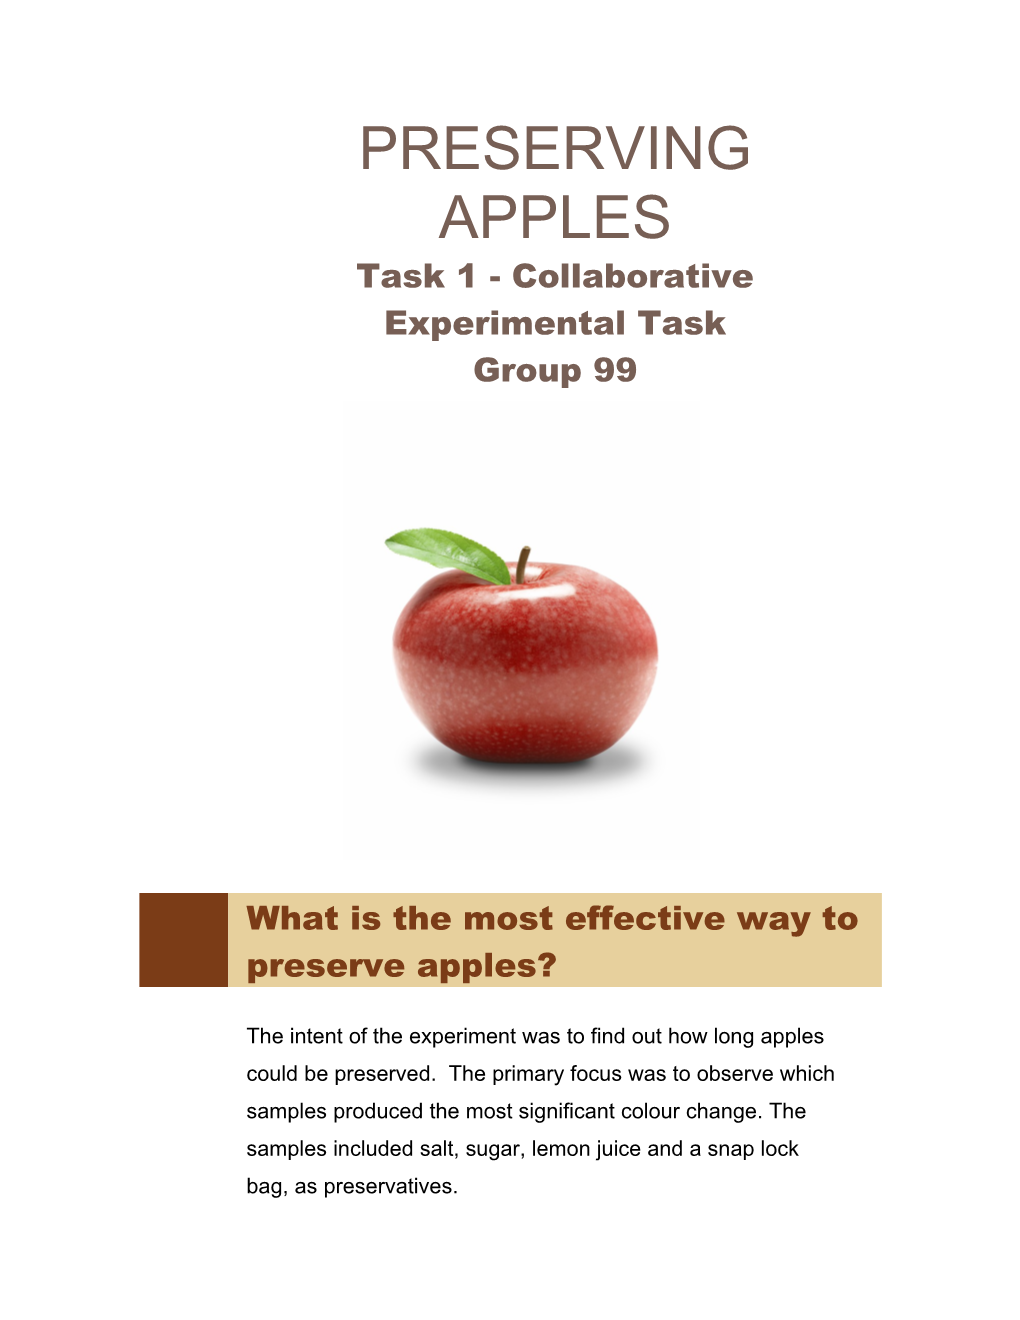 What Is the Most Effective Way to Preserve Apples?